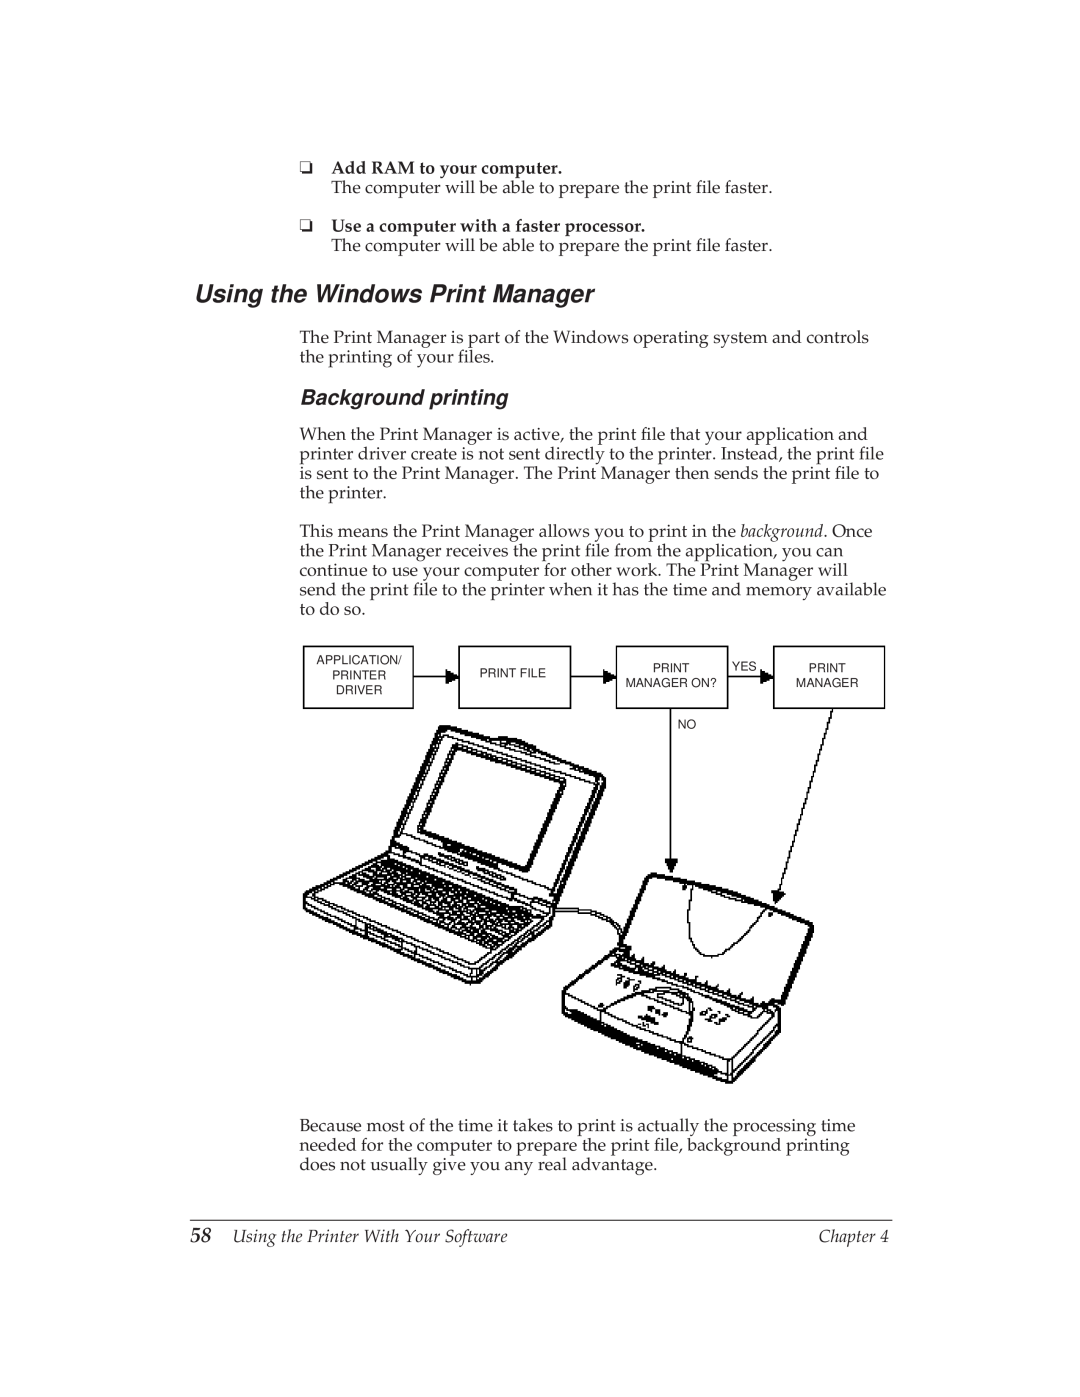 Canon BJ-30 manual Using the Windows Print Manager, Background printing, Add RAM to your computer 